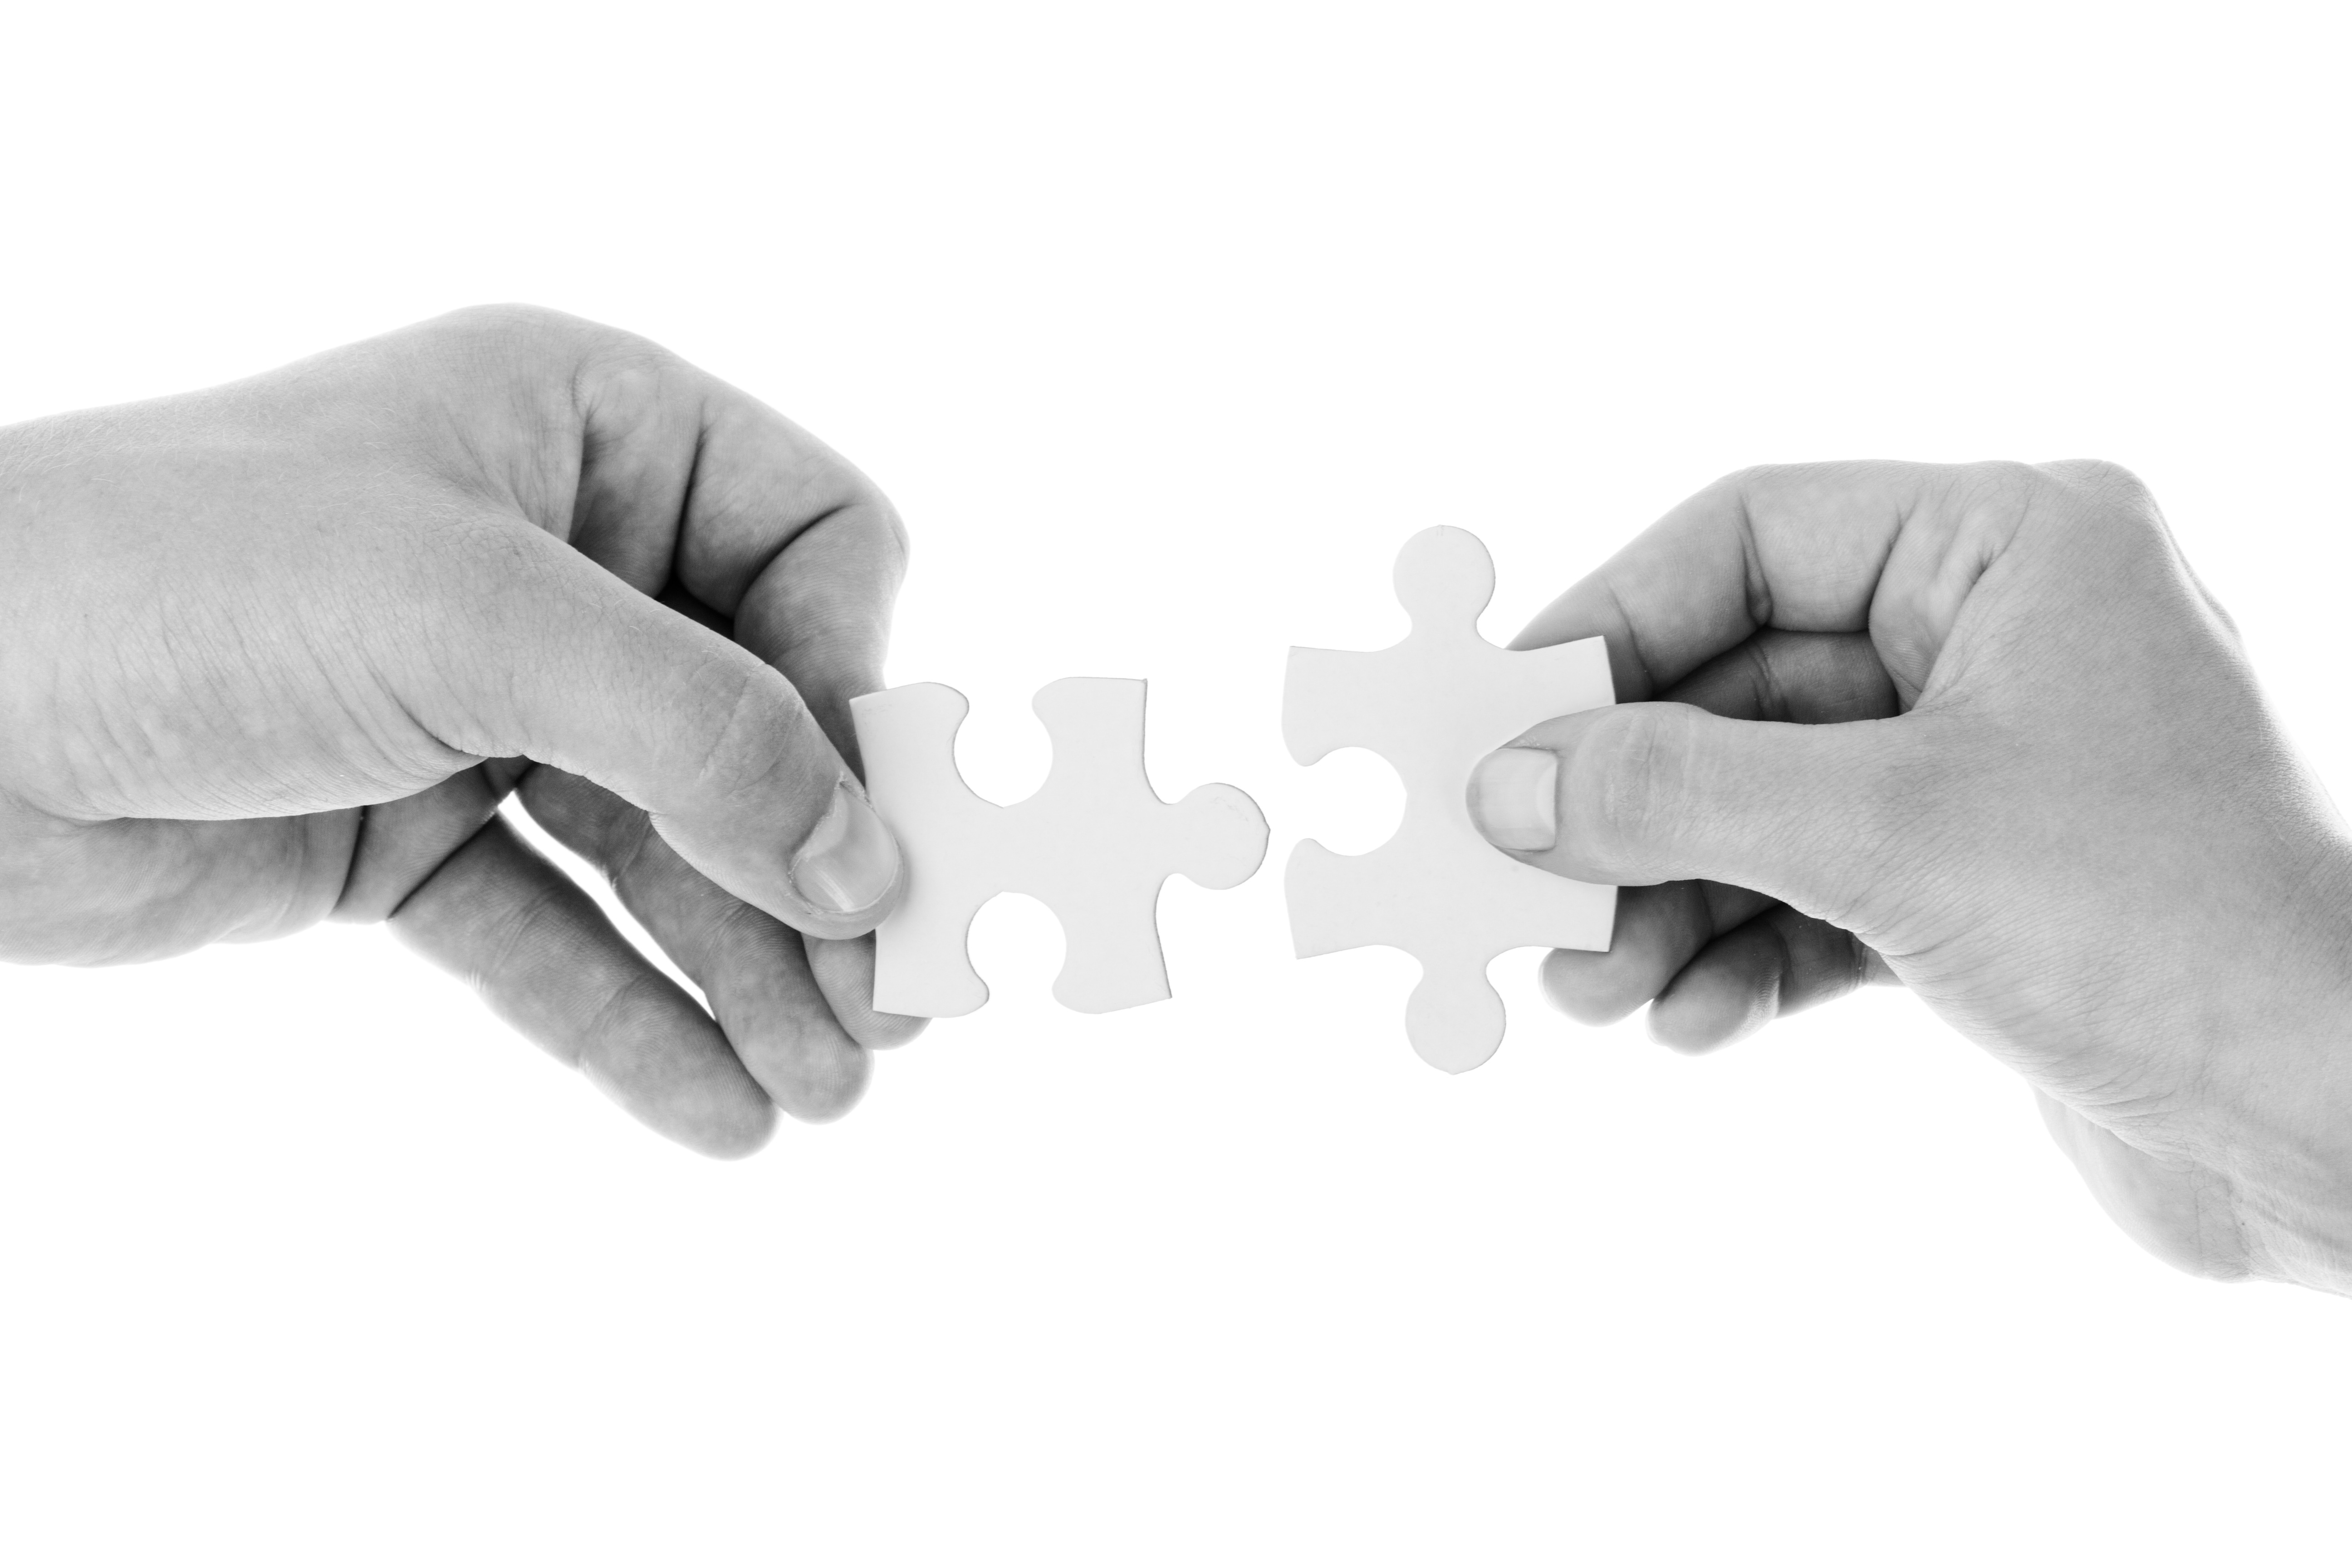 Two hands holding puzzle pieces about to connect them together